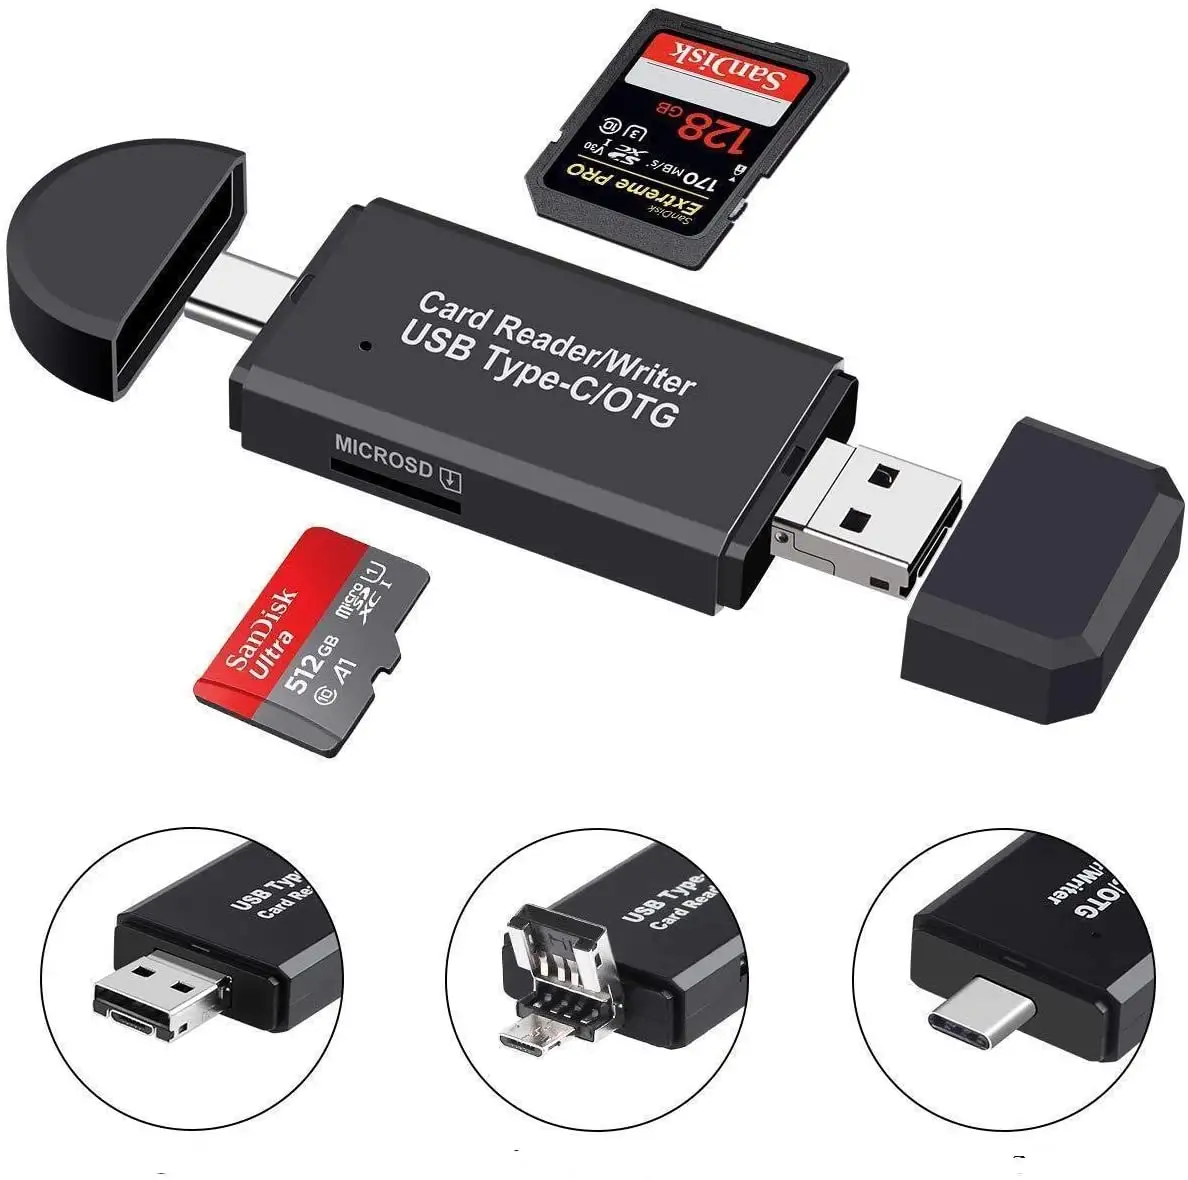 USB 2.0 3.0 OTG 3 in 1 Type - C Card Reader All in One Card Reader